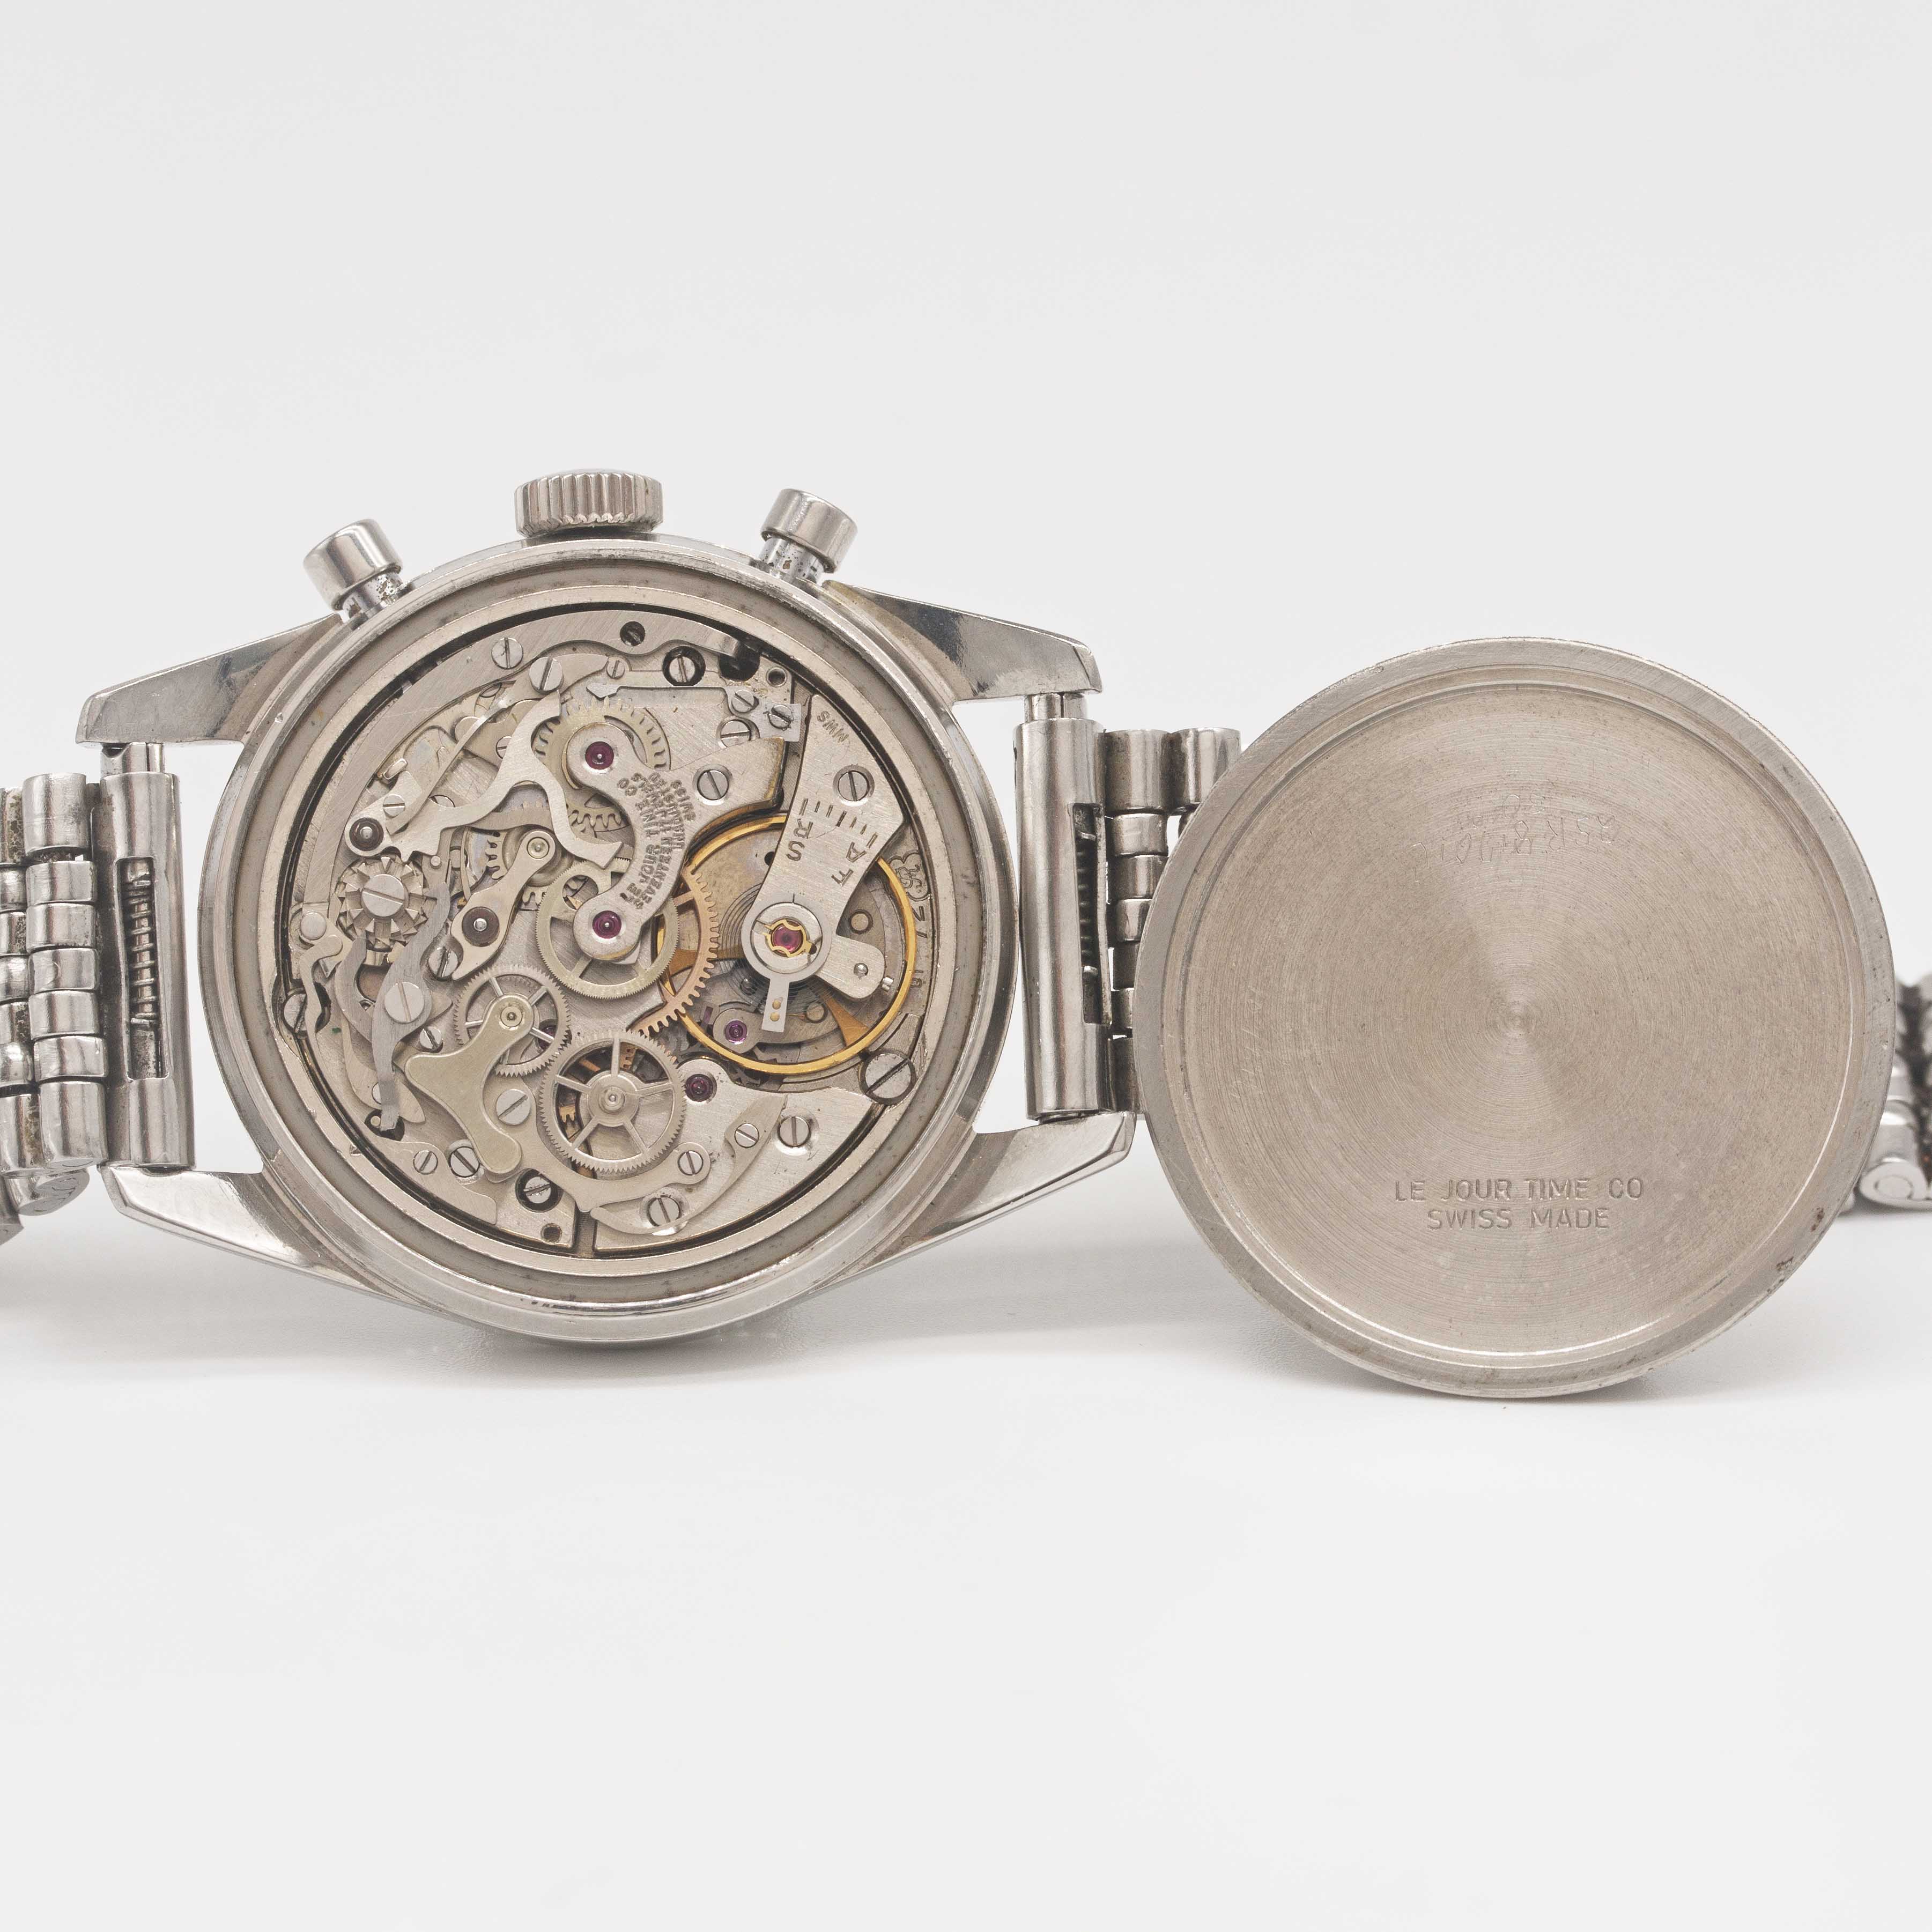 A GENTLEMAN'S STAINLESS STEEL WAKMANN CHRONOGRAPH BRACELET WATCH CIRCA 1960s, WITH "TWISTED" - Image 7 of 9